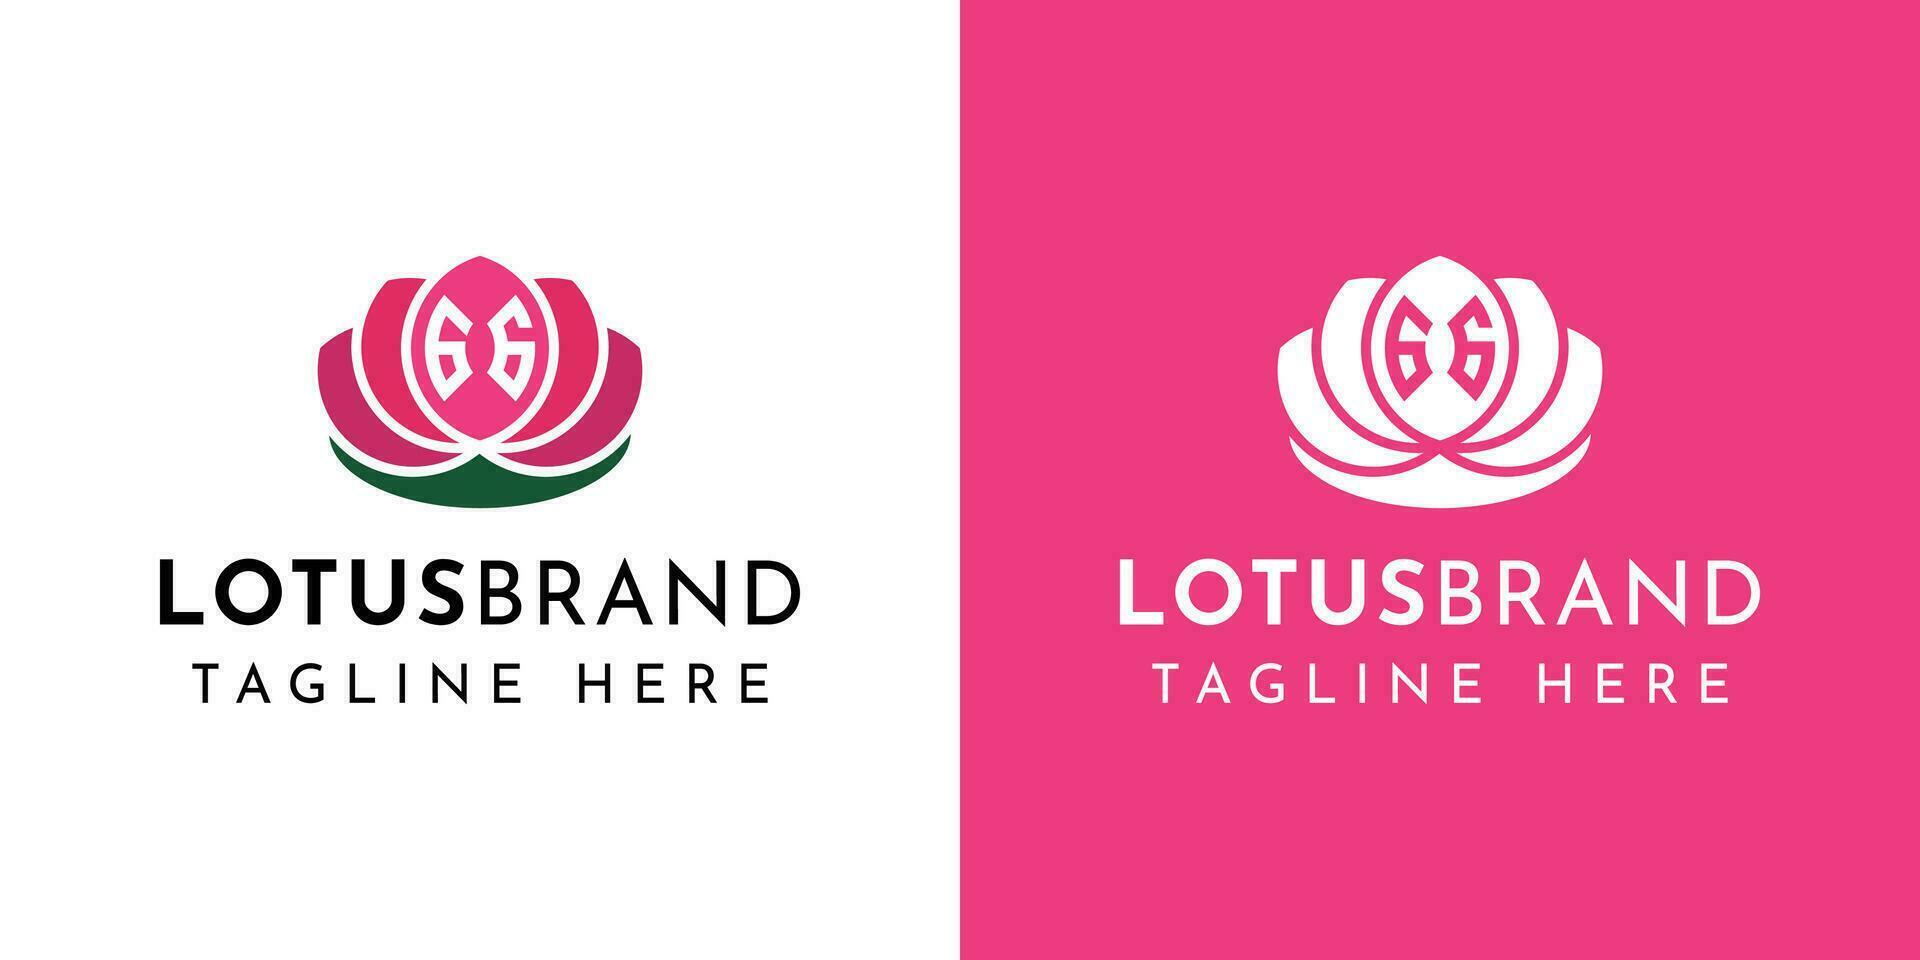 Letter GG Lotus Logo Set, suitable for business related to lotus flowers with GG initials. vector